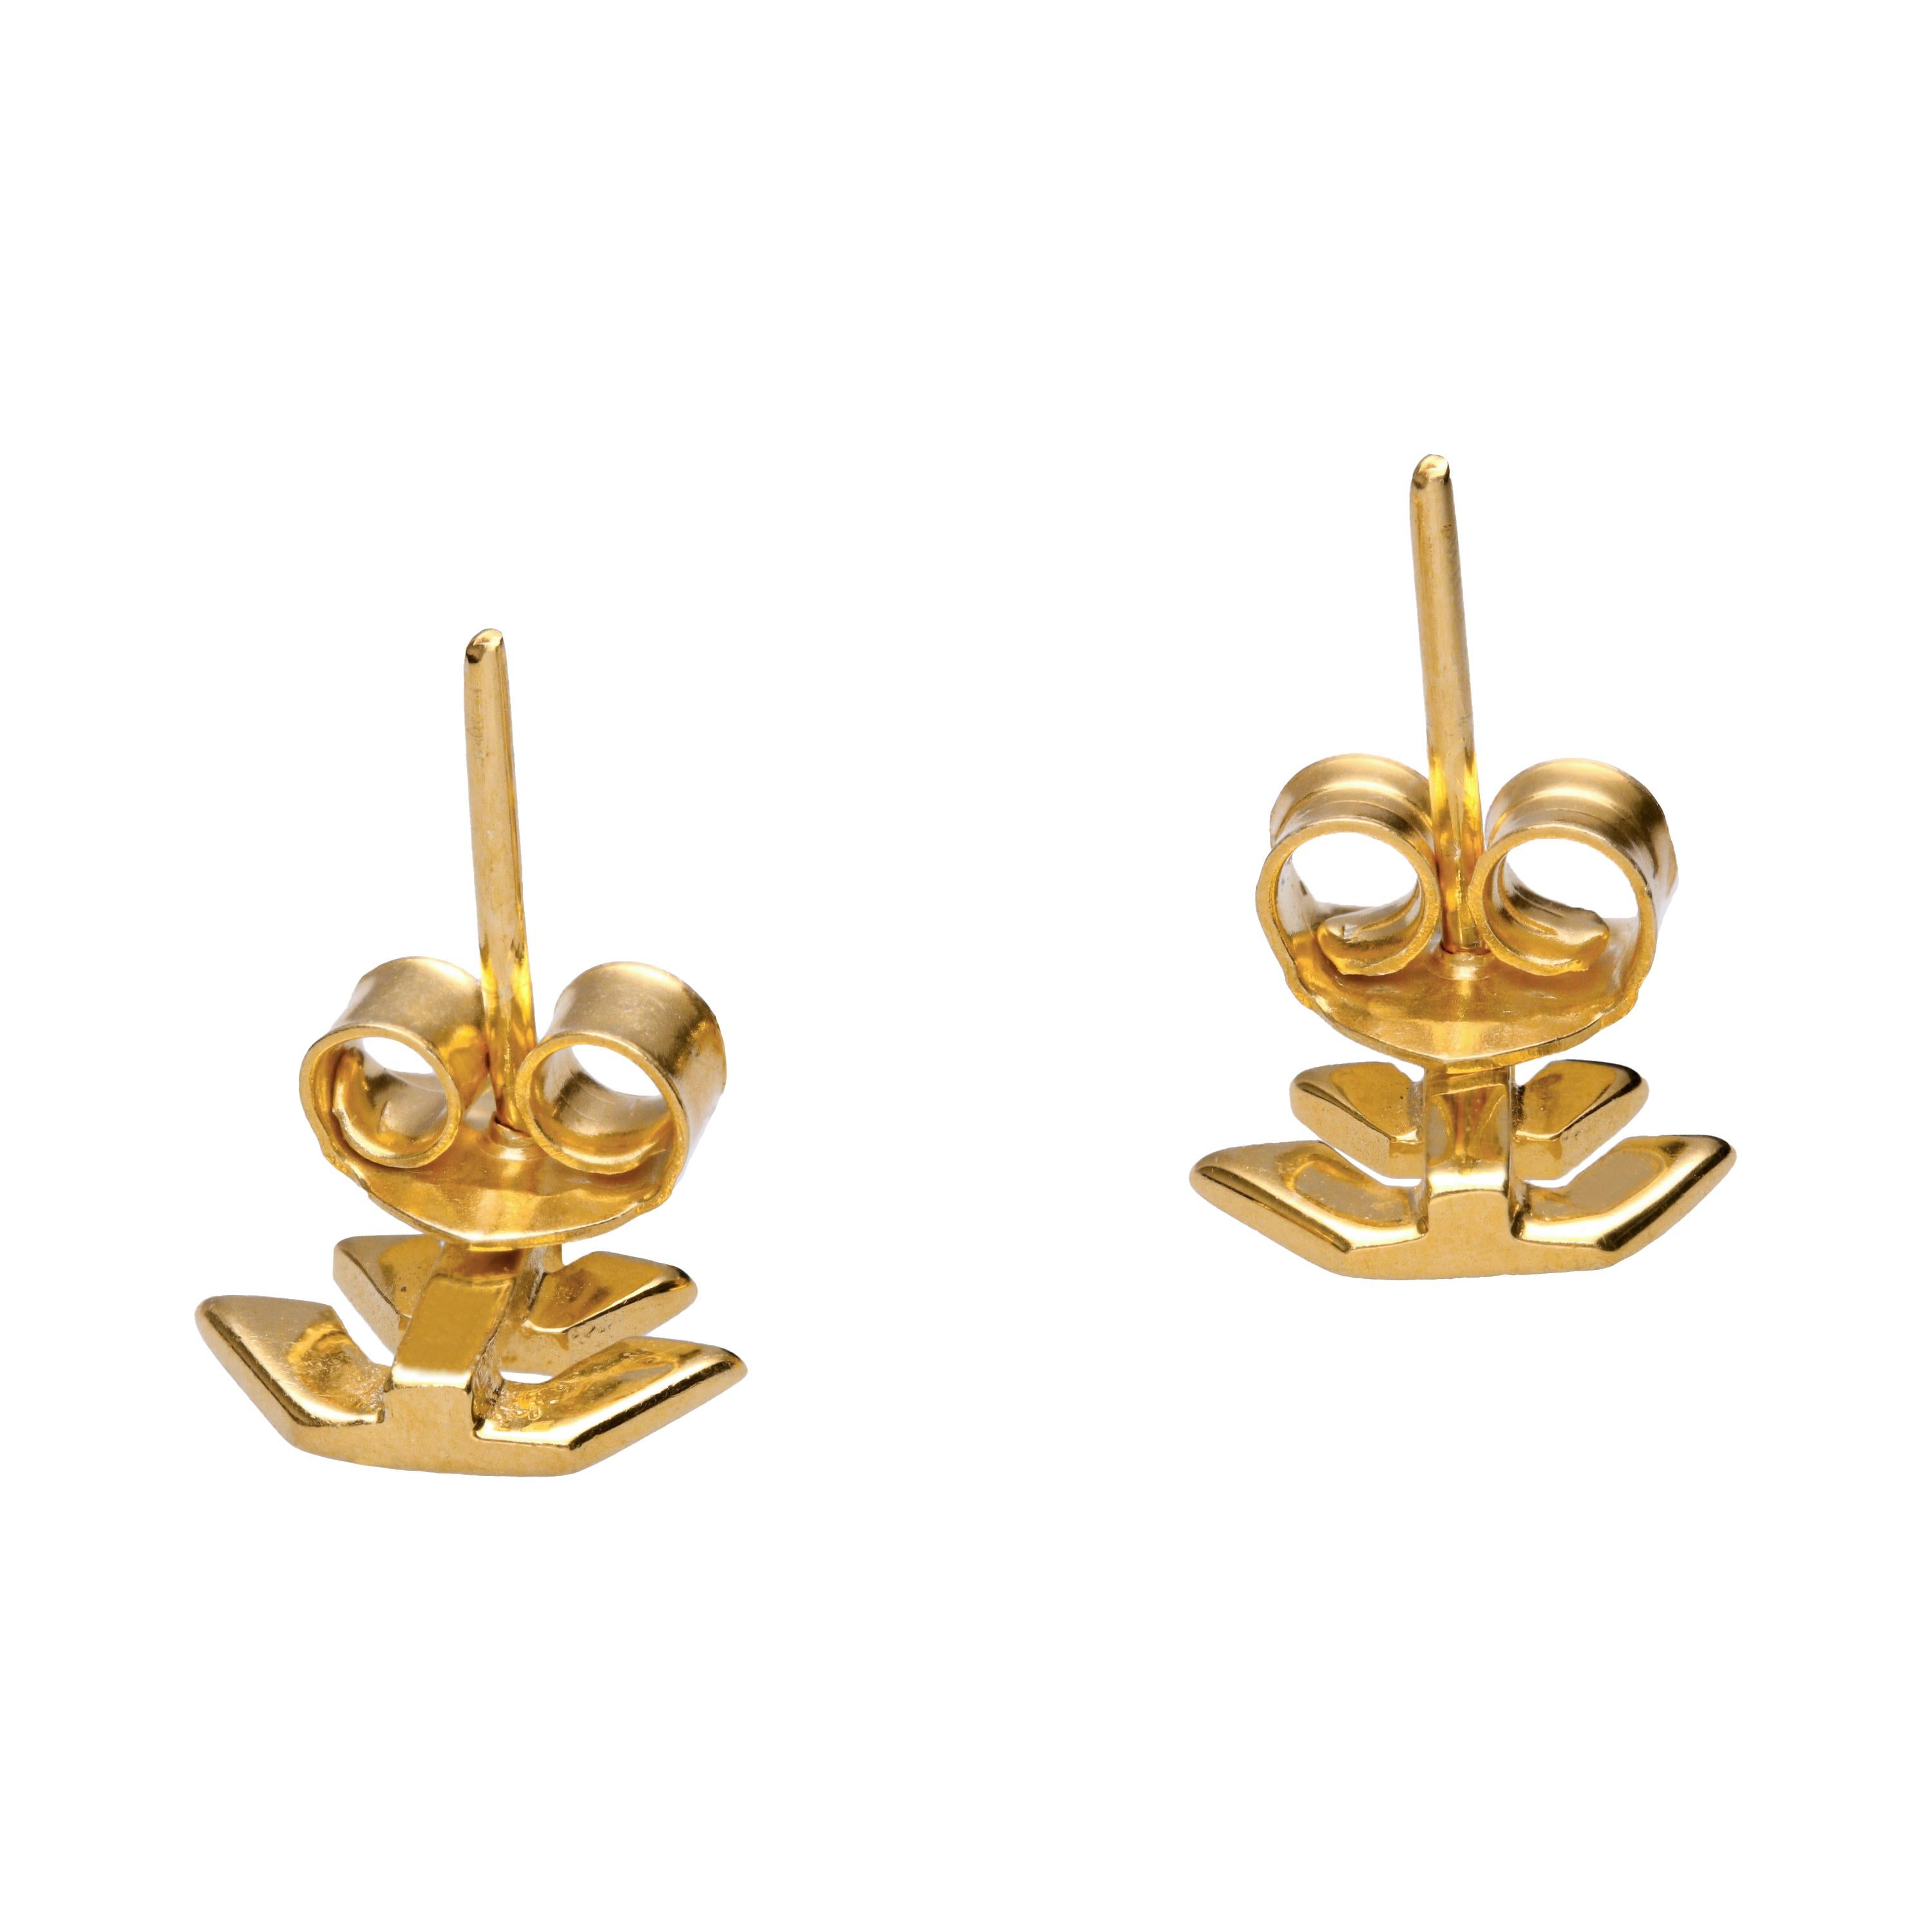 Contemporary Greca Earrings Studs in 14k Yellow Gold For Sale